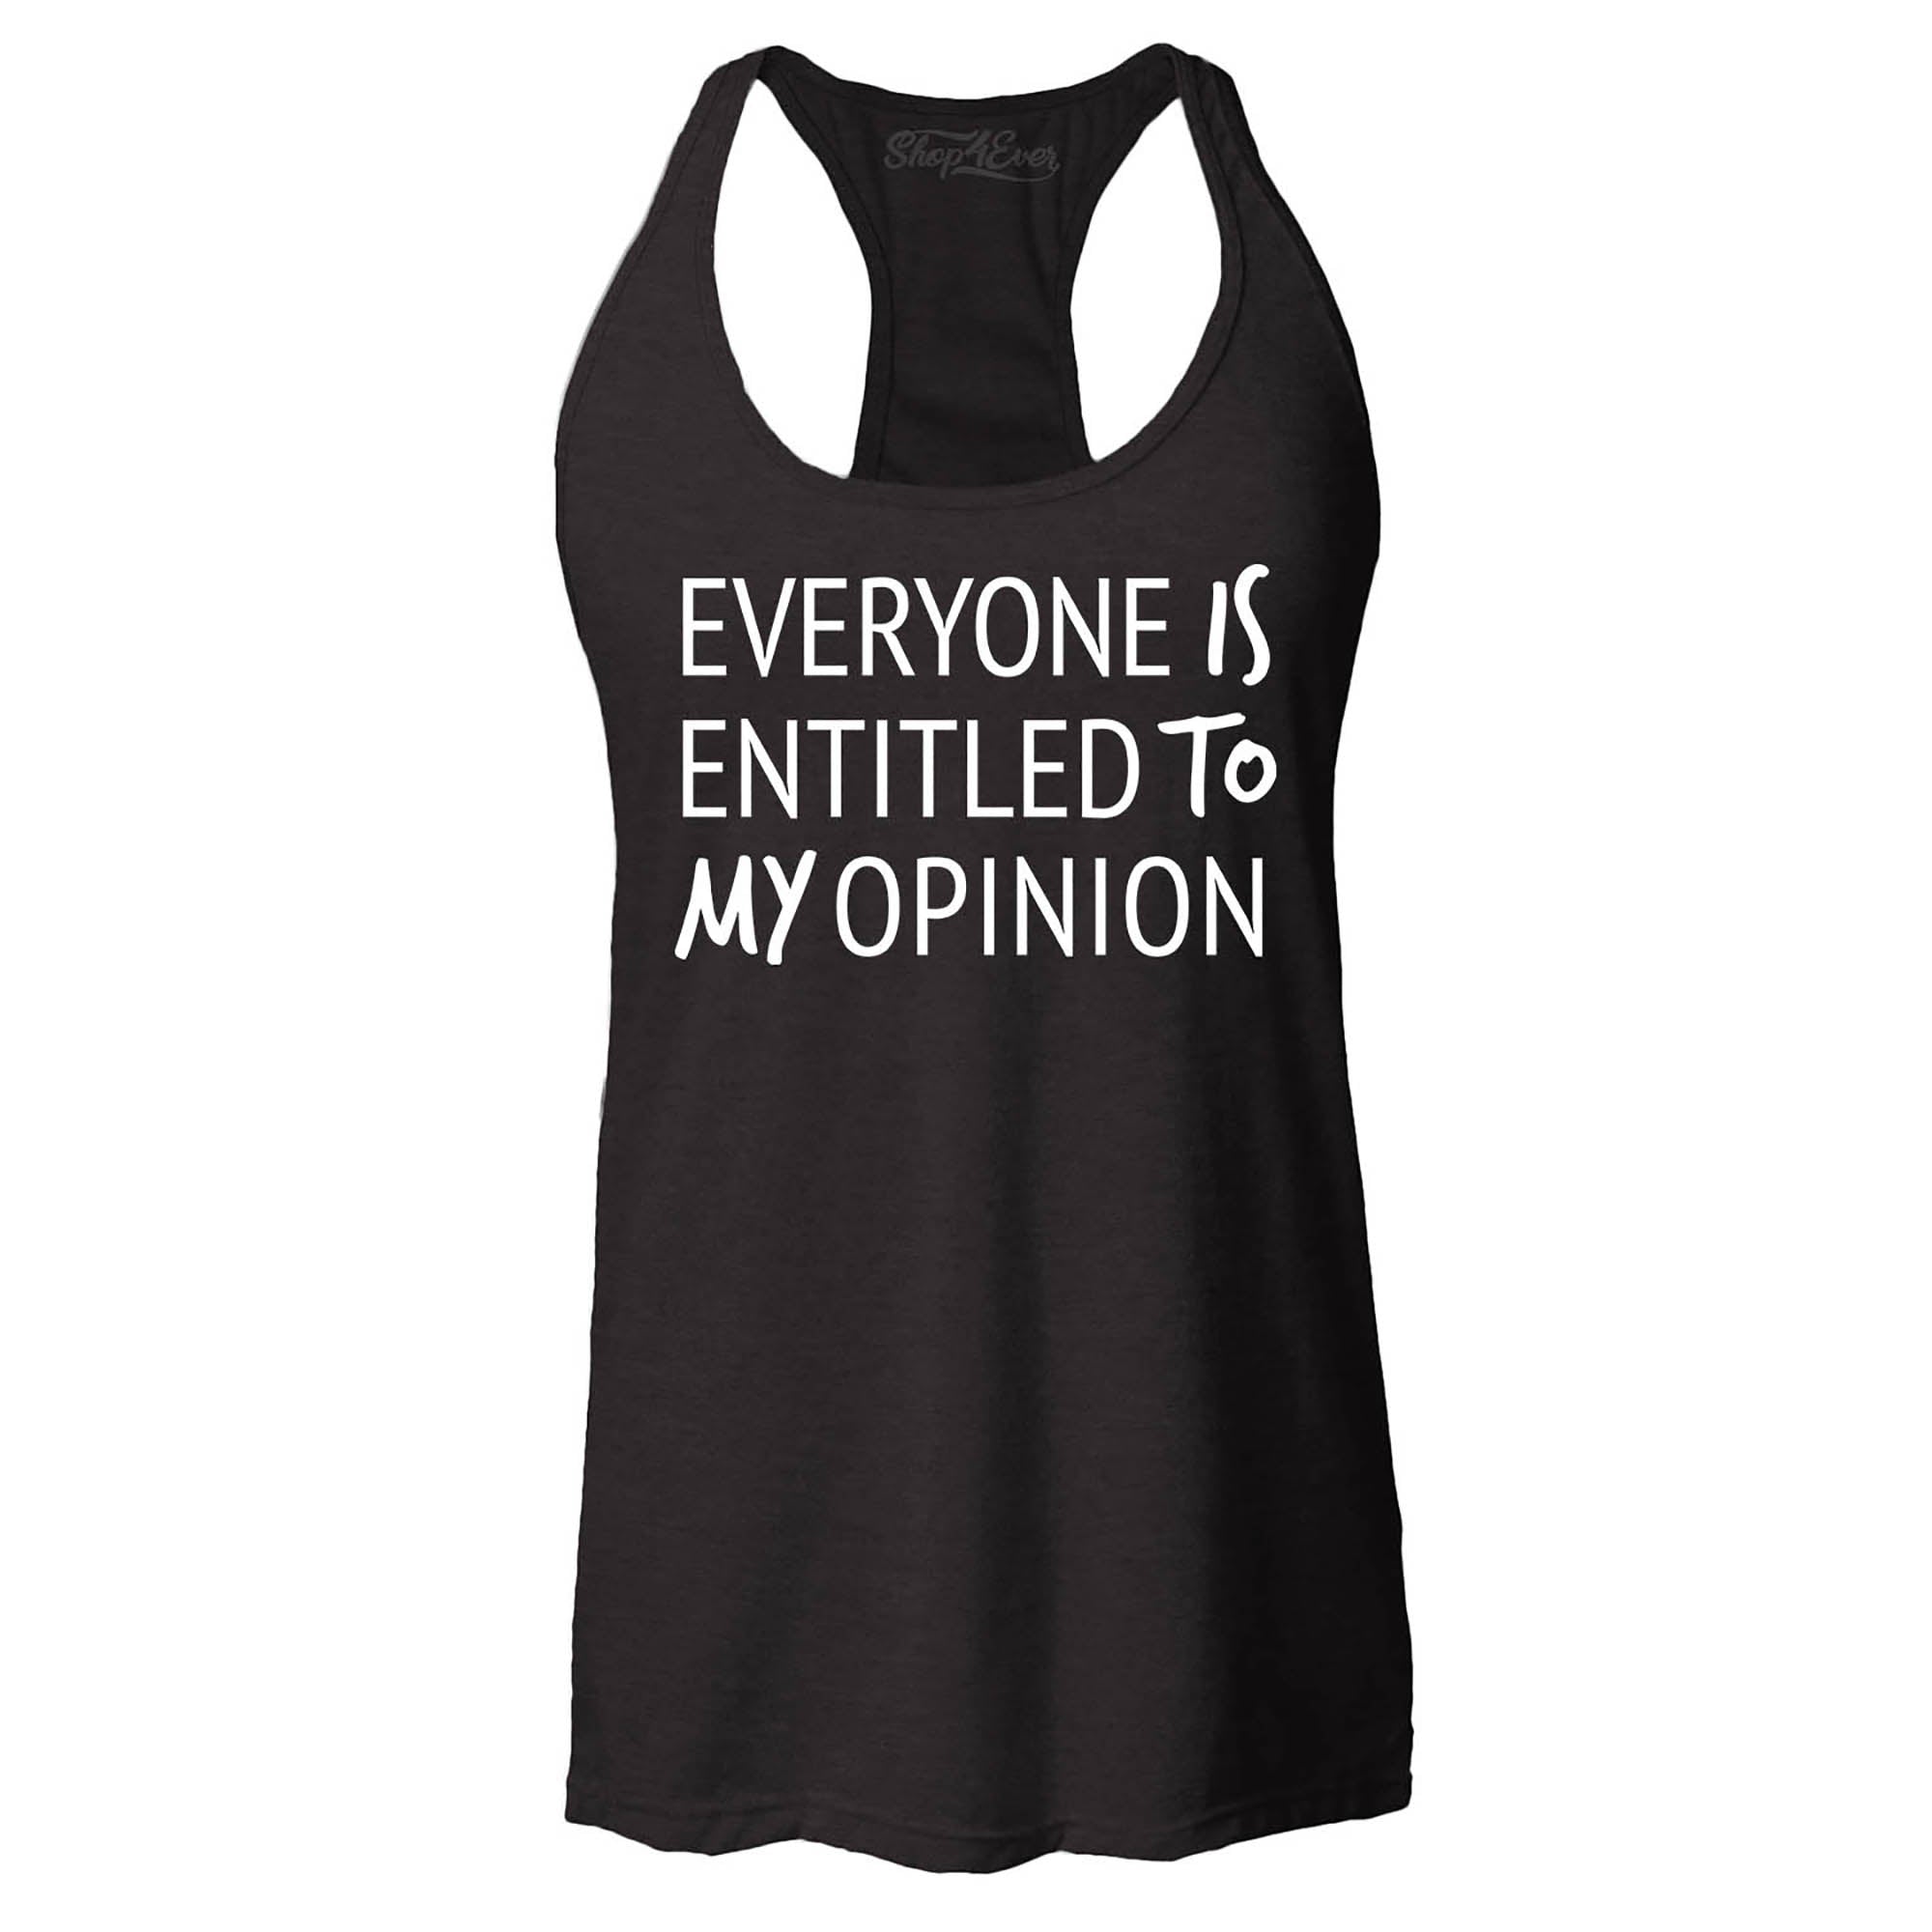 Everyone is Entitled to My Opinion Funny Sarcastic Women's Racerback Tank Top Slim Fit